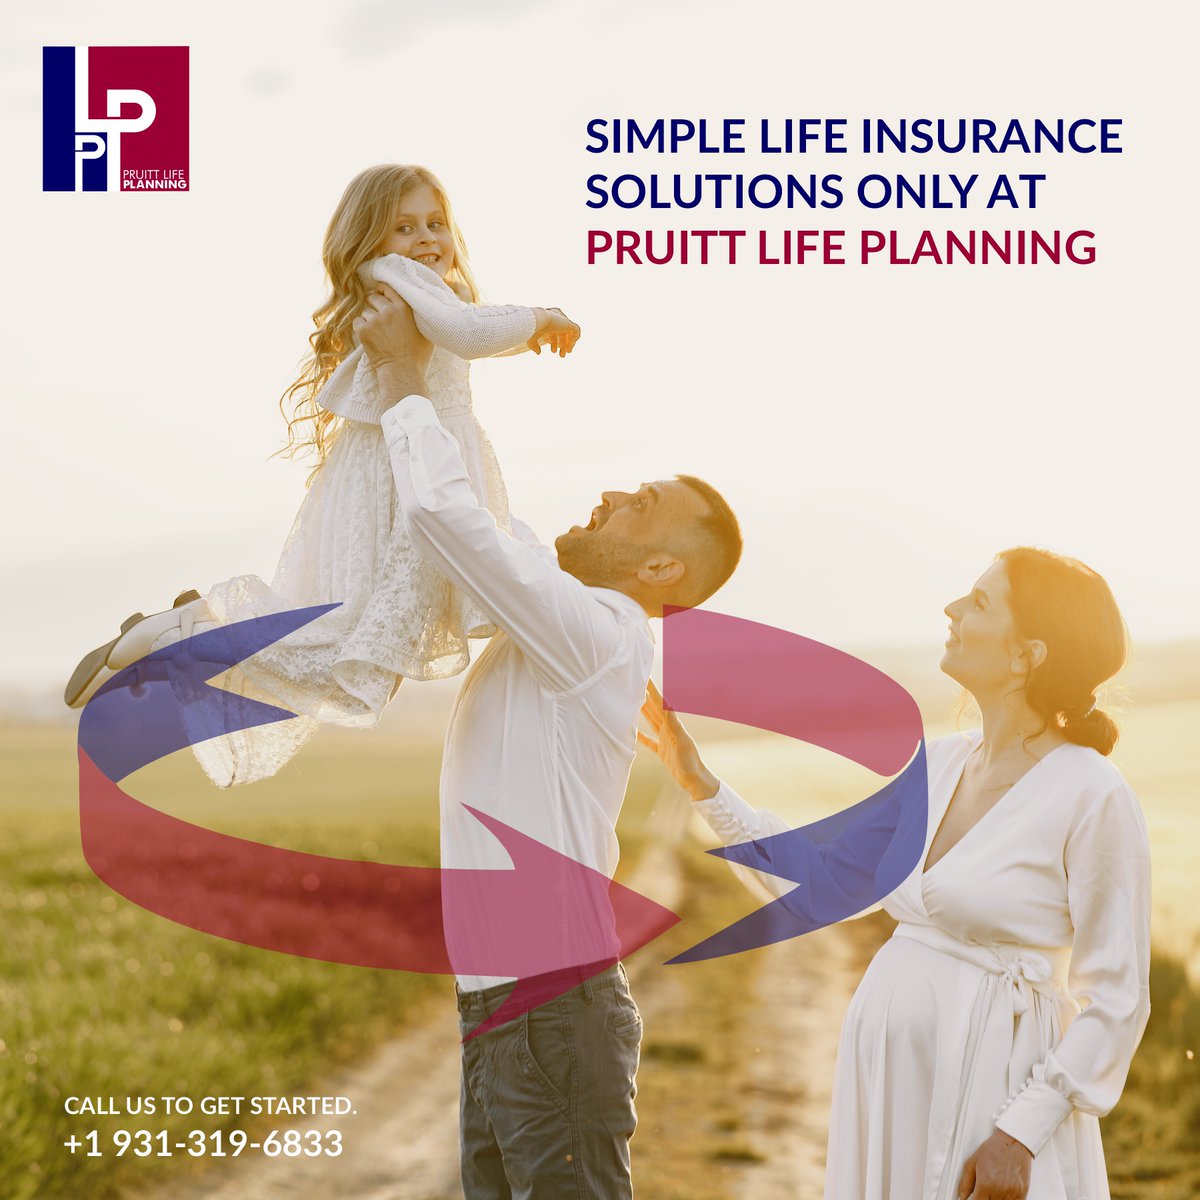 💼🛡️ Explore our range of options tailored to fit your needs and budget today. Peace of mind made easy.

Call Us On +1 931-319-6833

#PruittLifePlanning #LifeInsurance #FinancialSecurity #ProtectYourFamily #PeaceOfMind #InsuranceSolutions #PlanForTheFuture